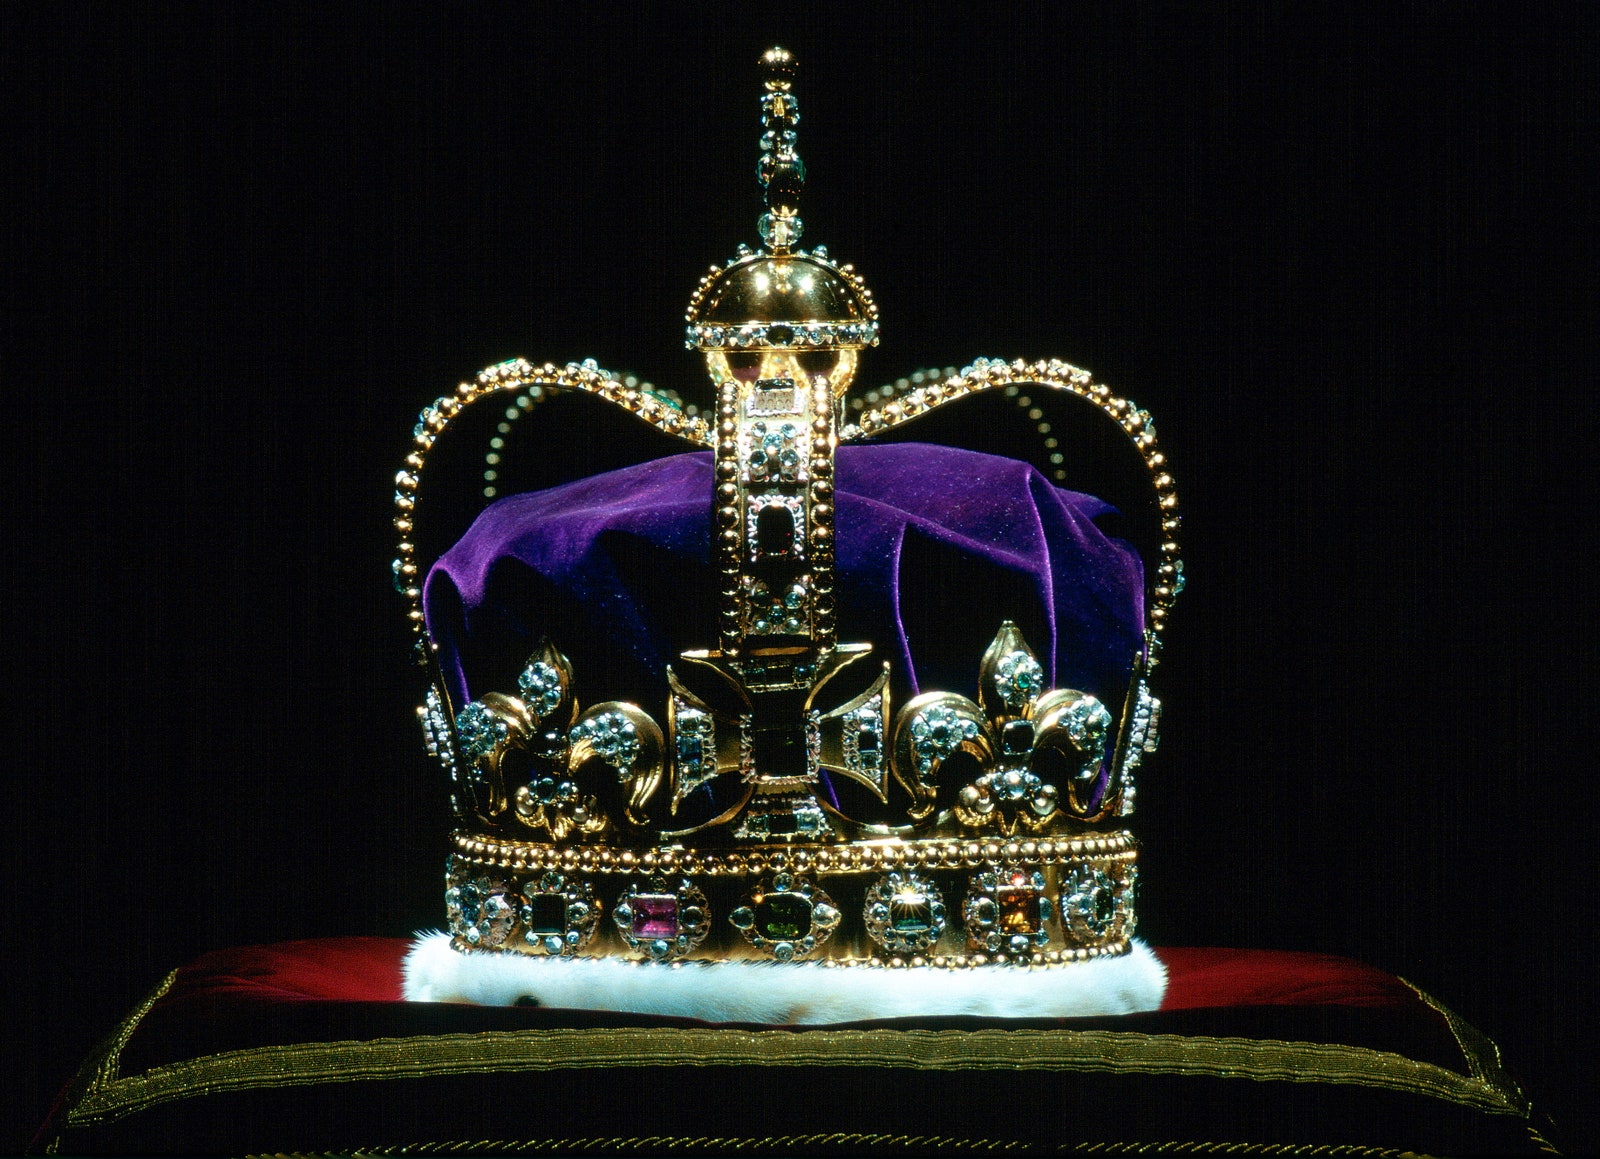 The St. Edward’s Crown.